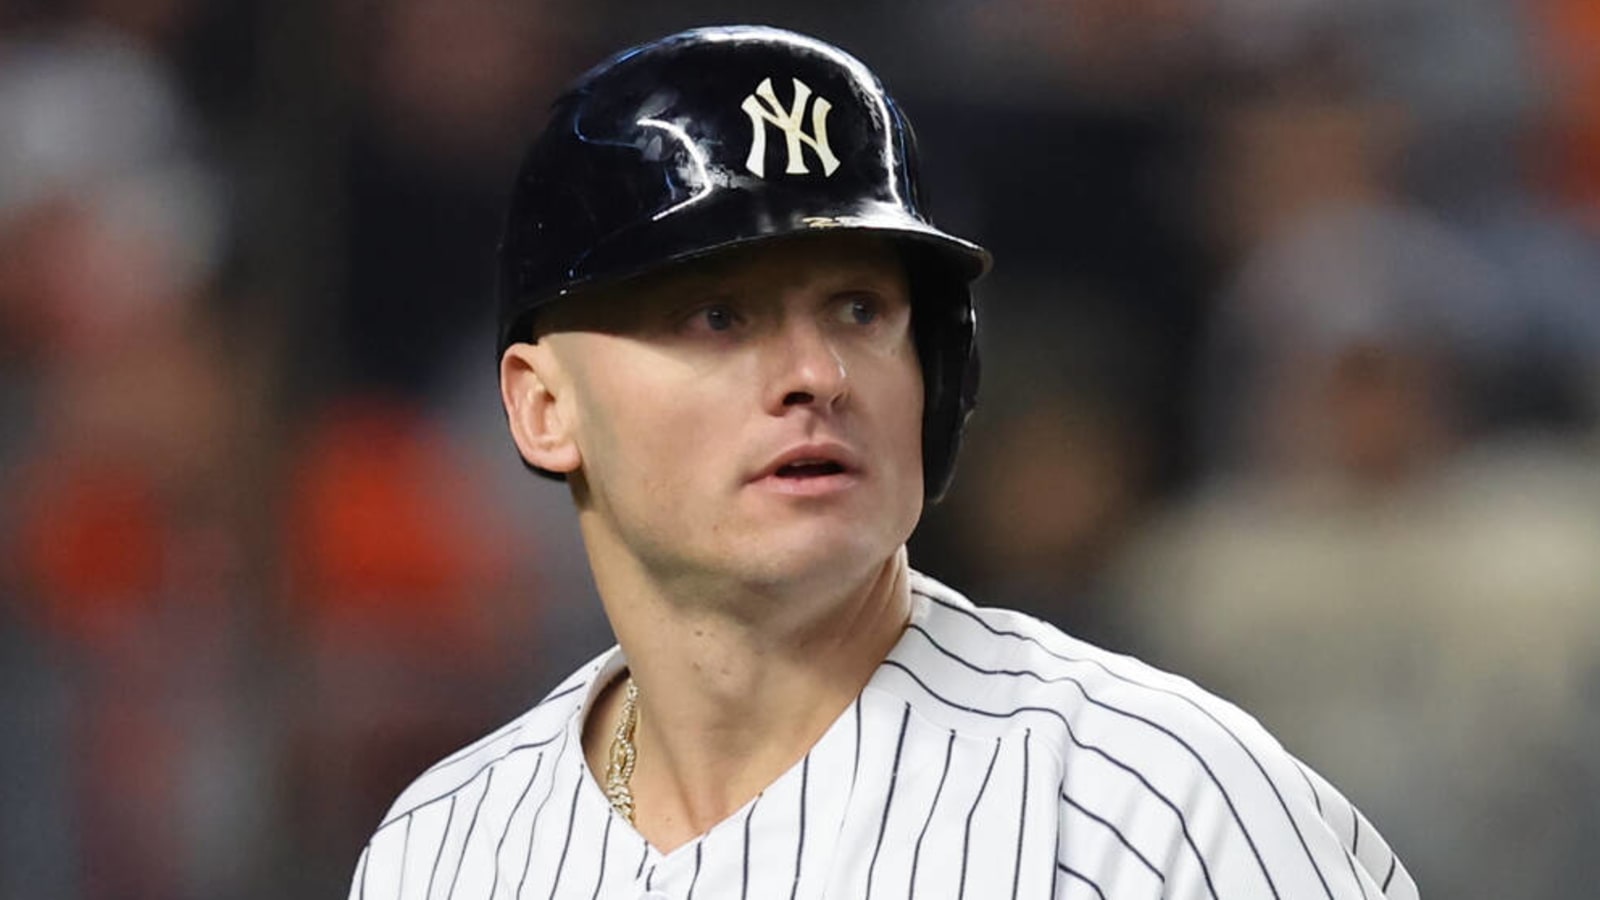 Boone's latest Donaldson comments reaffirm ridiculous Yankees stance